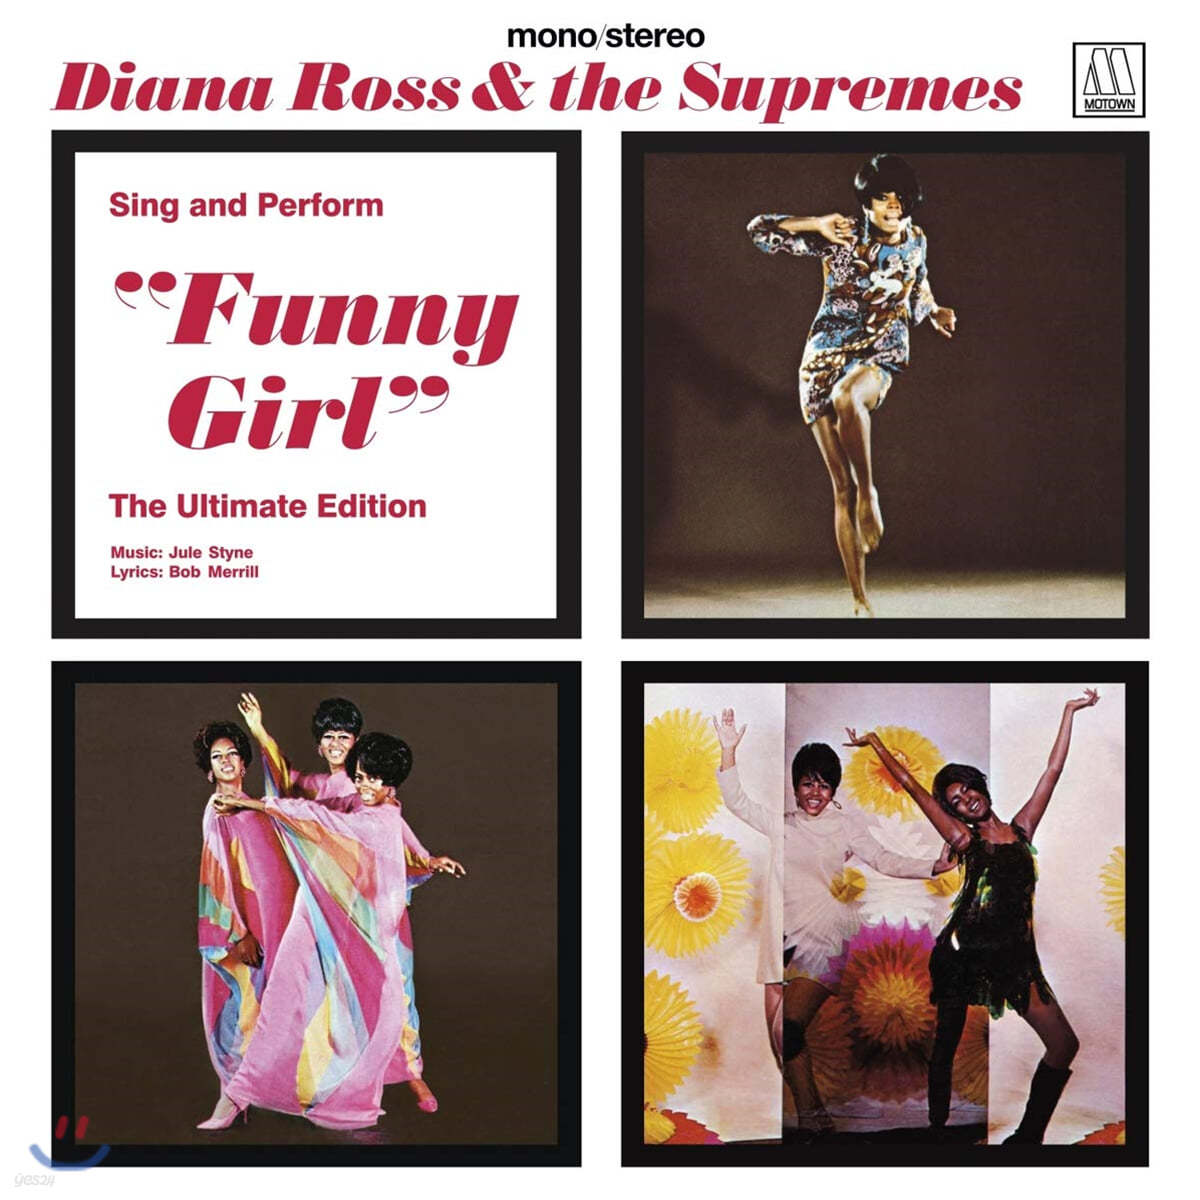 Diana Ross &amp; The Supremes (다이아나 로스 앤 더 슈프림스) - Sing and Perform &quot;Funny Girl&quot; - The Ultimate Edition